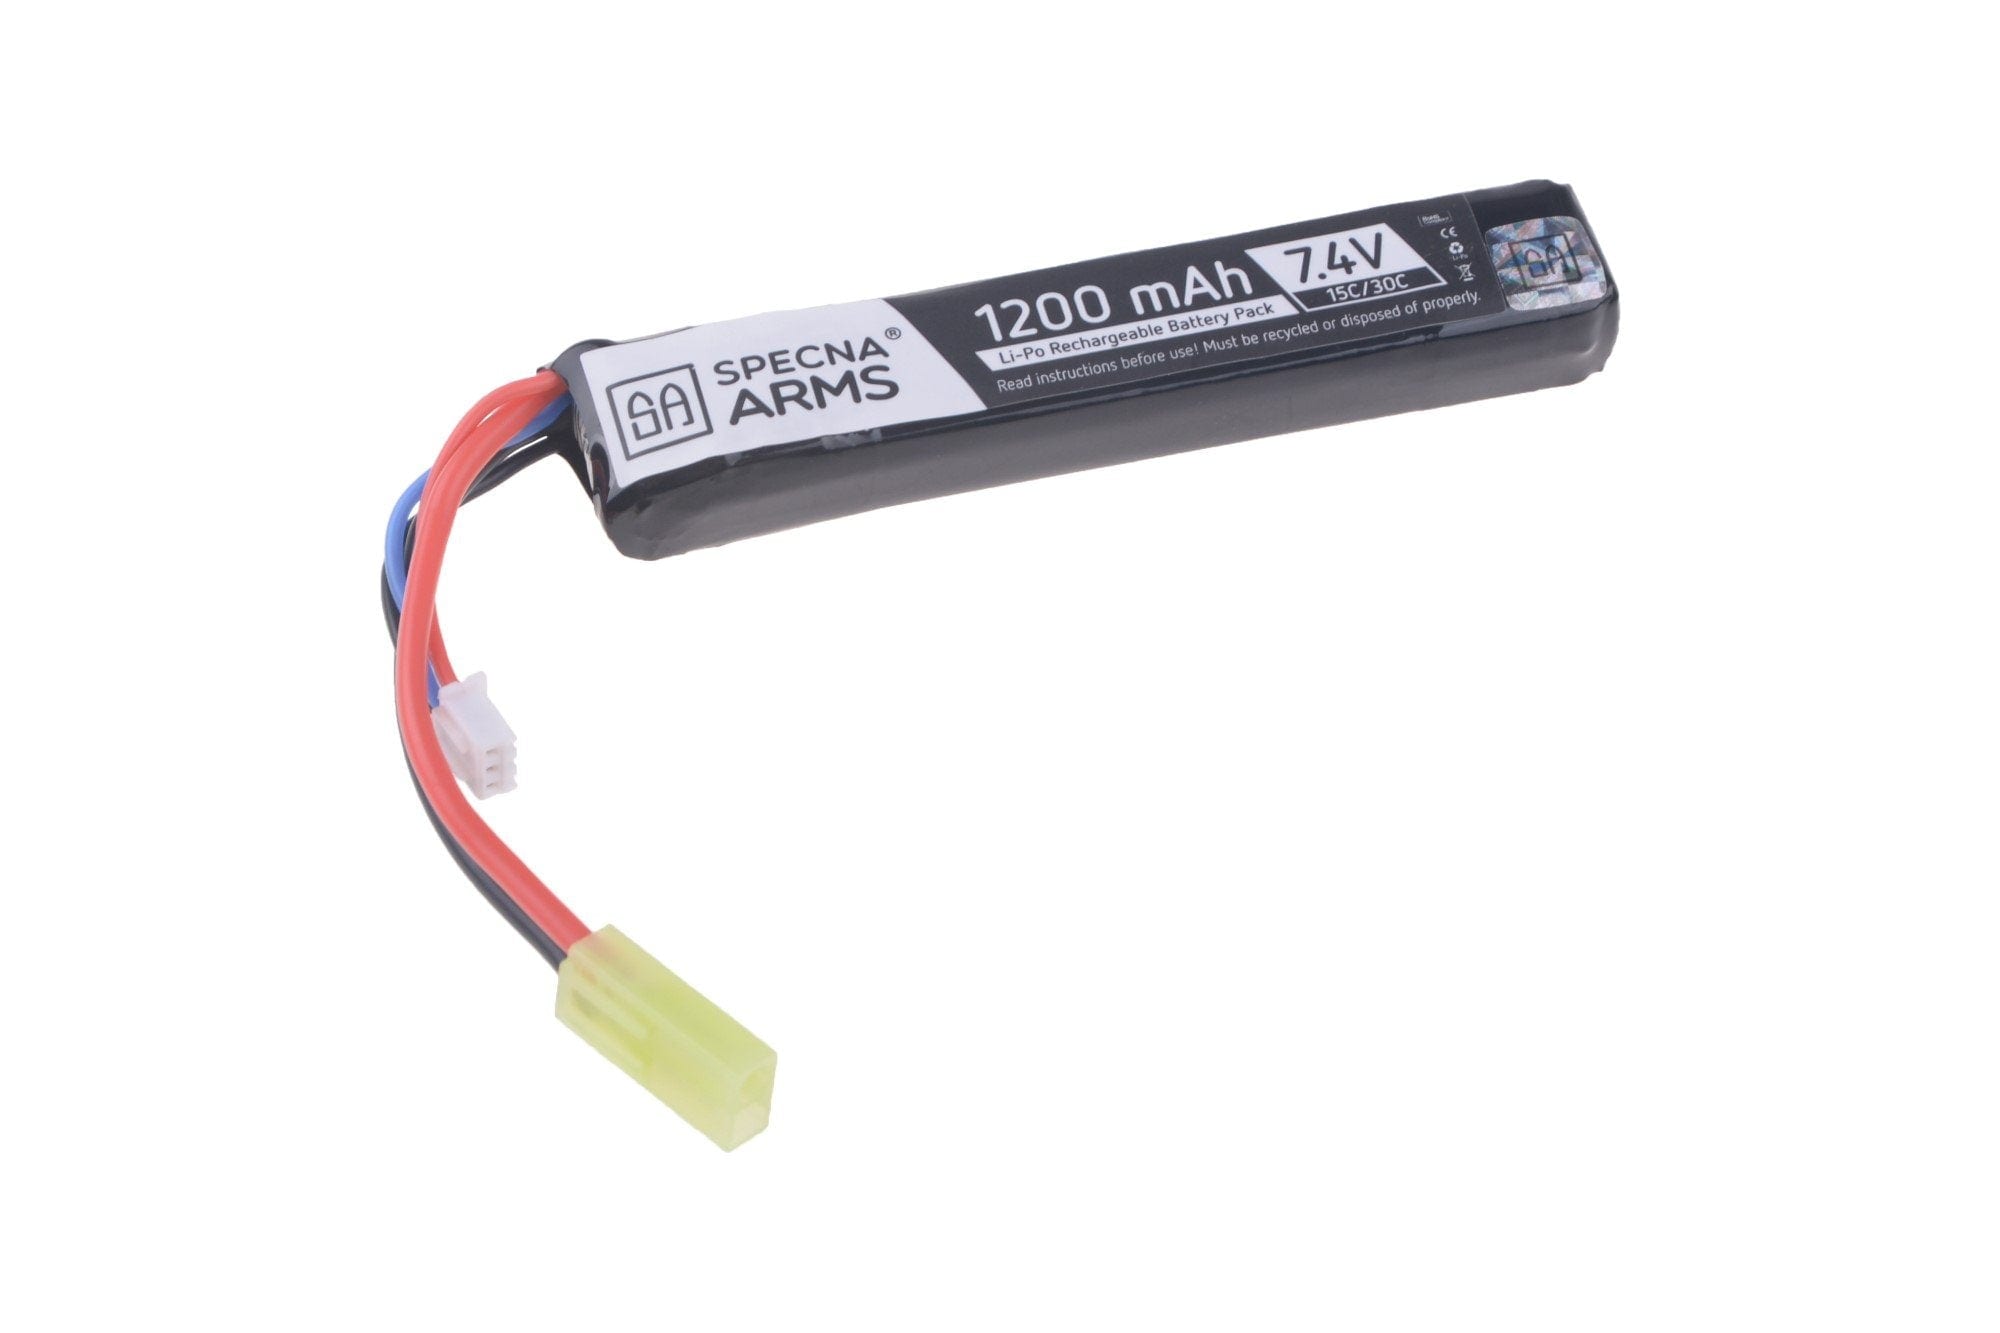 7.4V 1200mAh LiPo battery 15 / 30C by Specna Arms on Airsoft Mania Europe